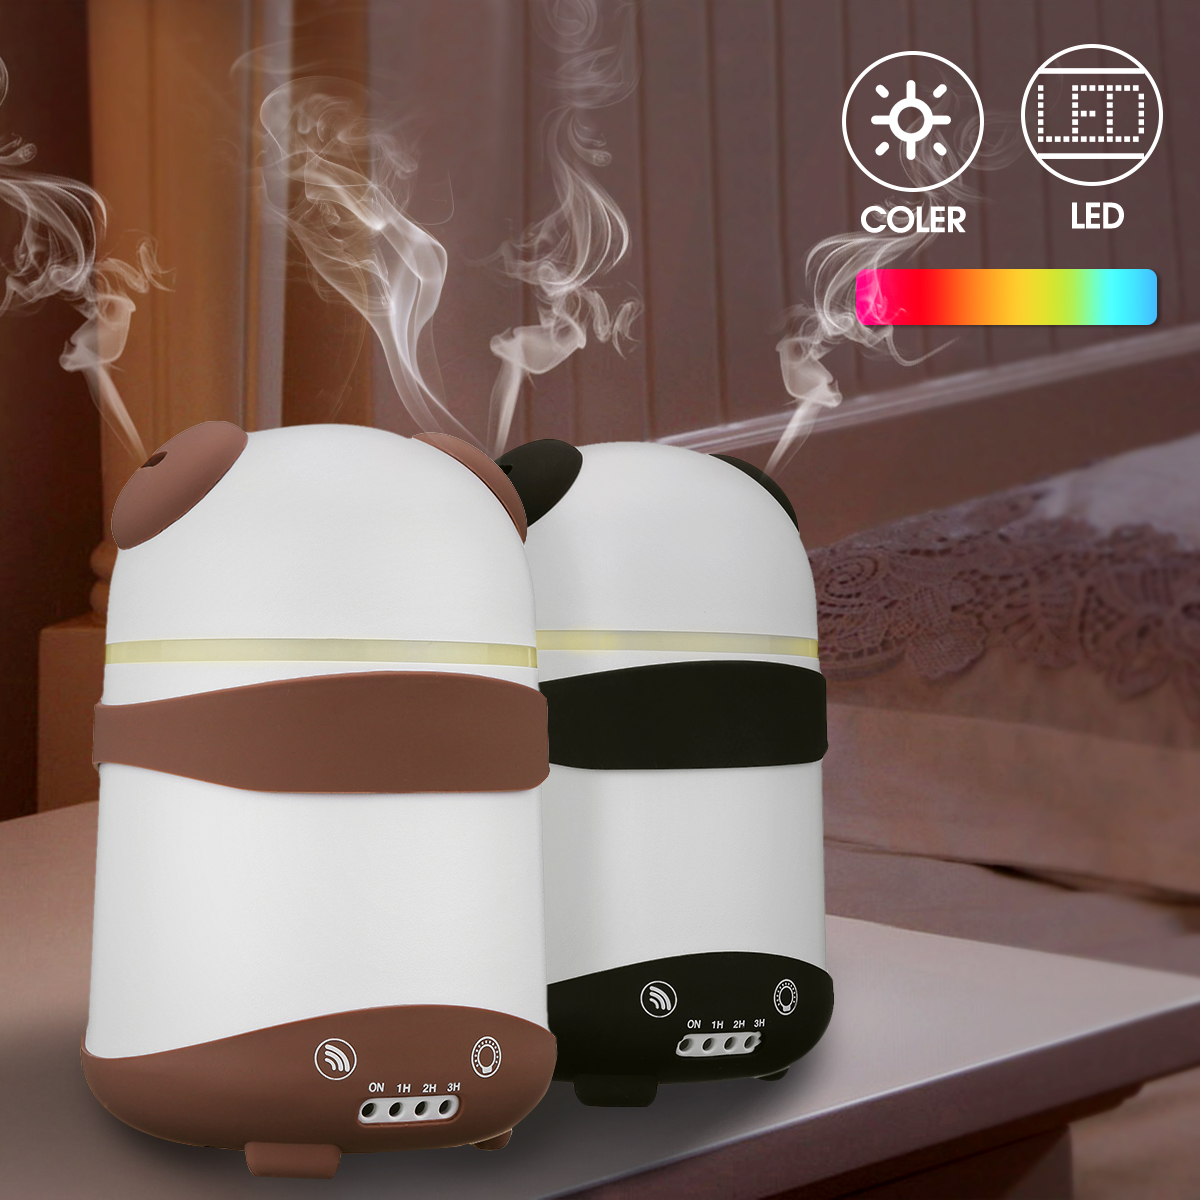 Dual Humidifier Air Oil Diffuser Aroma Mist Maker LED Cartoon Panda Style For Home Office US Plug 49